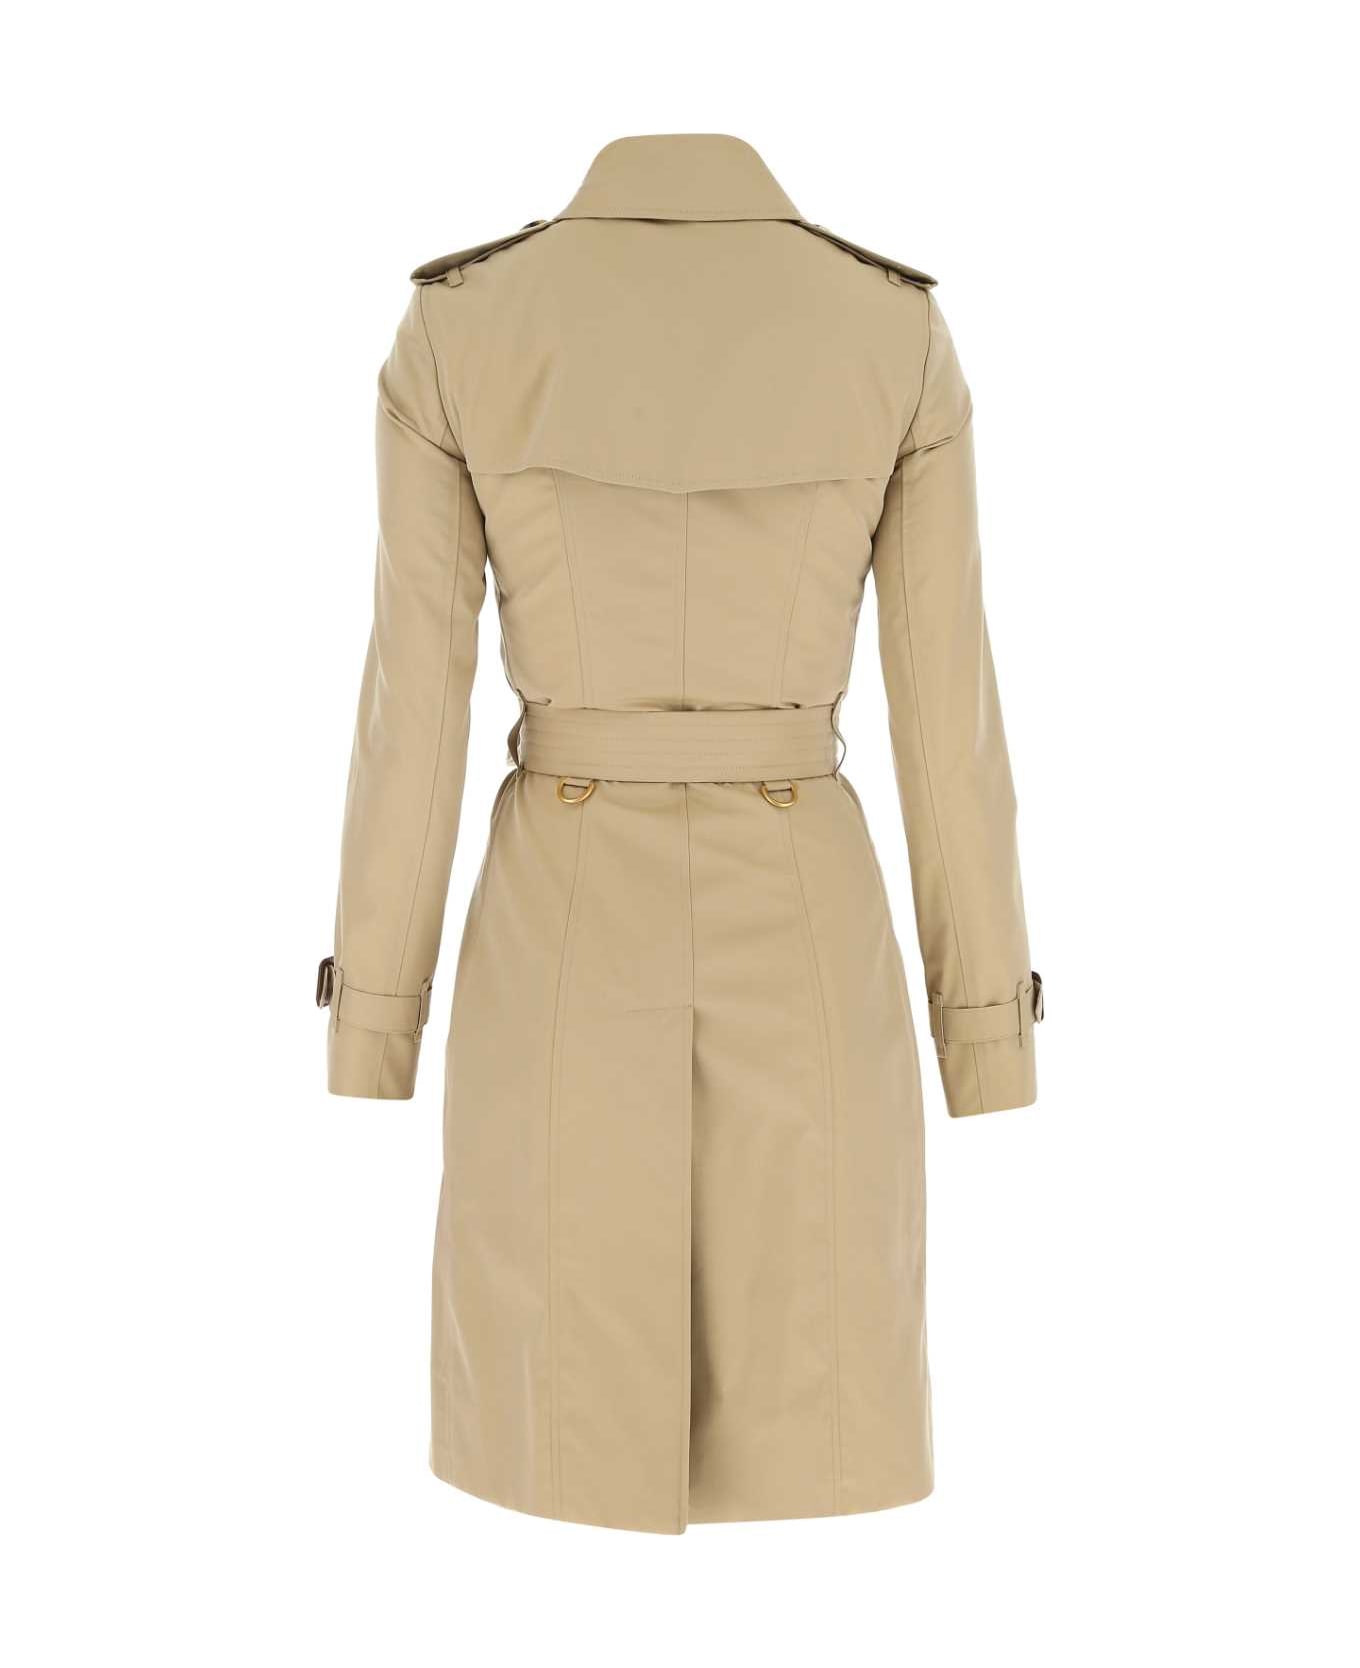 Burberry Cappuccino Cotton Trench Coat - A1366